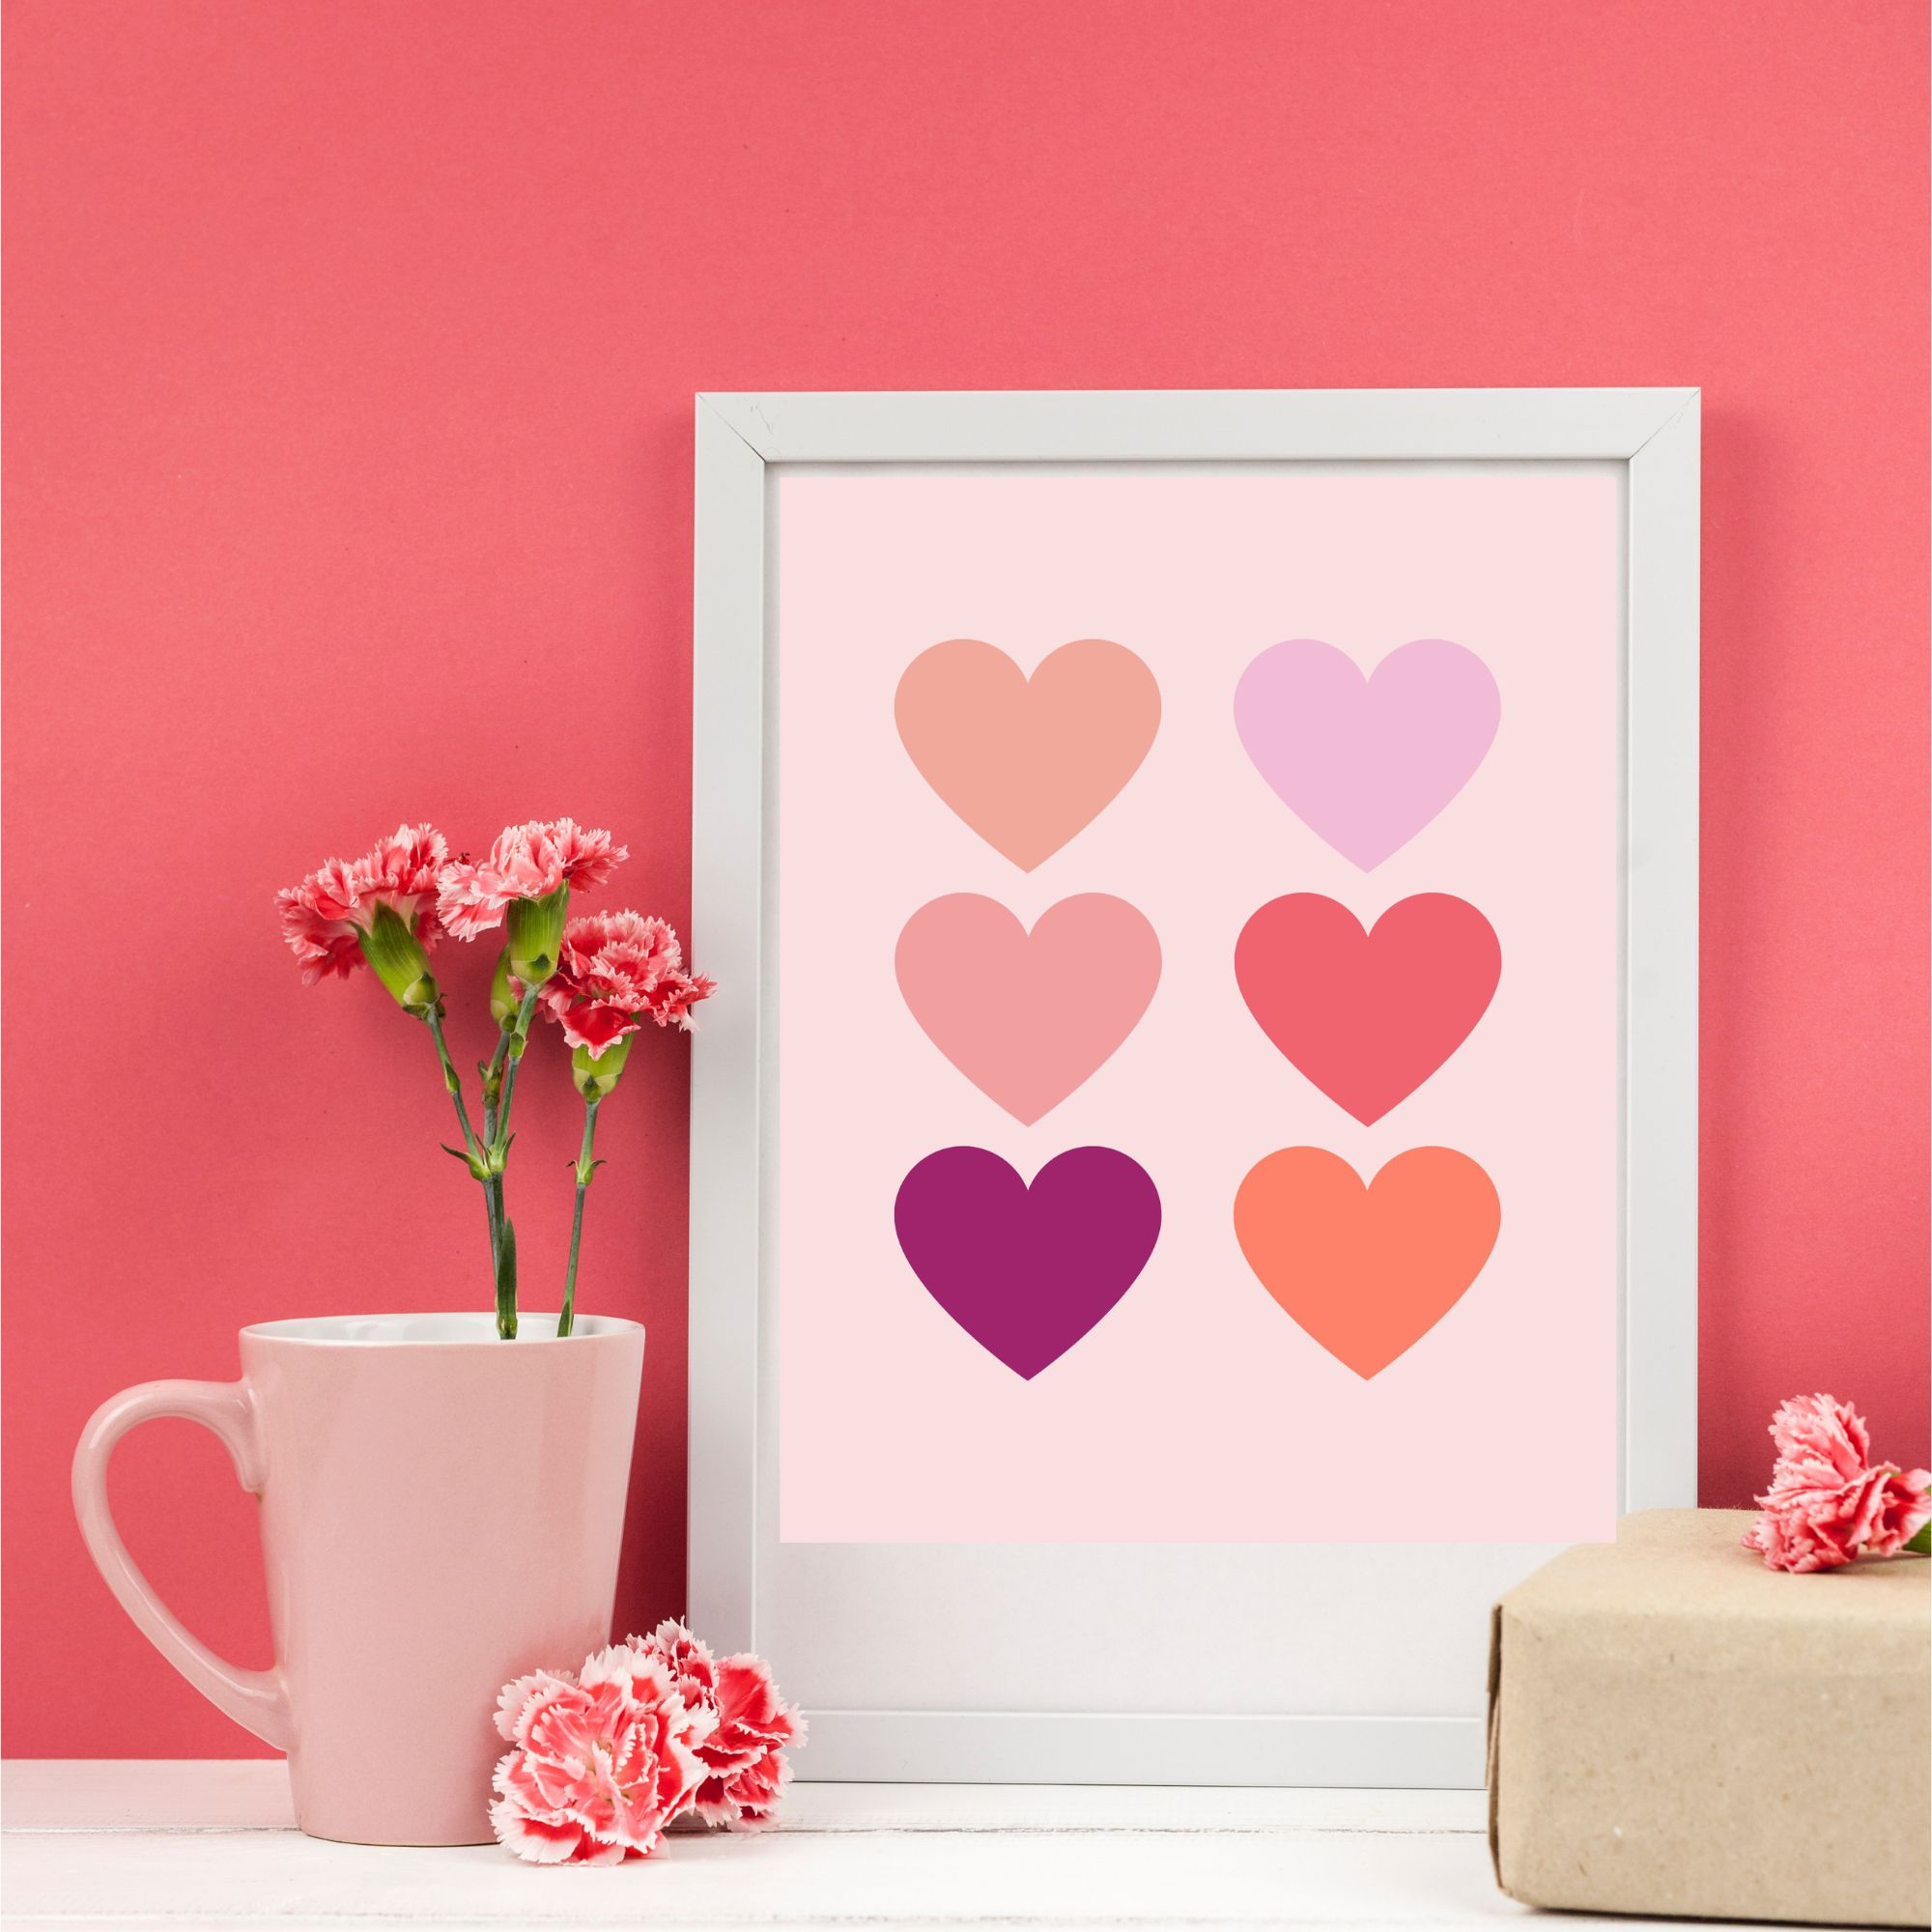 Modern Valentine Hearts Printable Wall Art, Valentine\'s Day, Valentines Day Decor, Classroom Decor, Nursery Decor, pink red heart - Digital preview image.